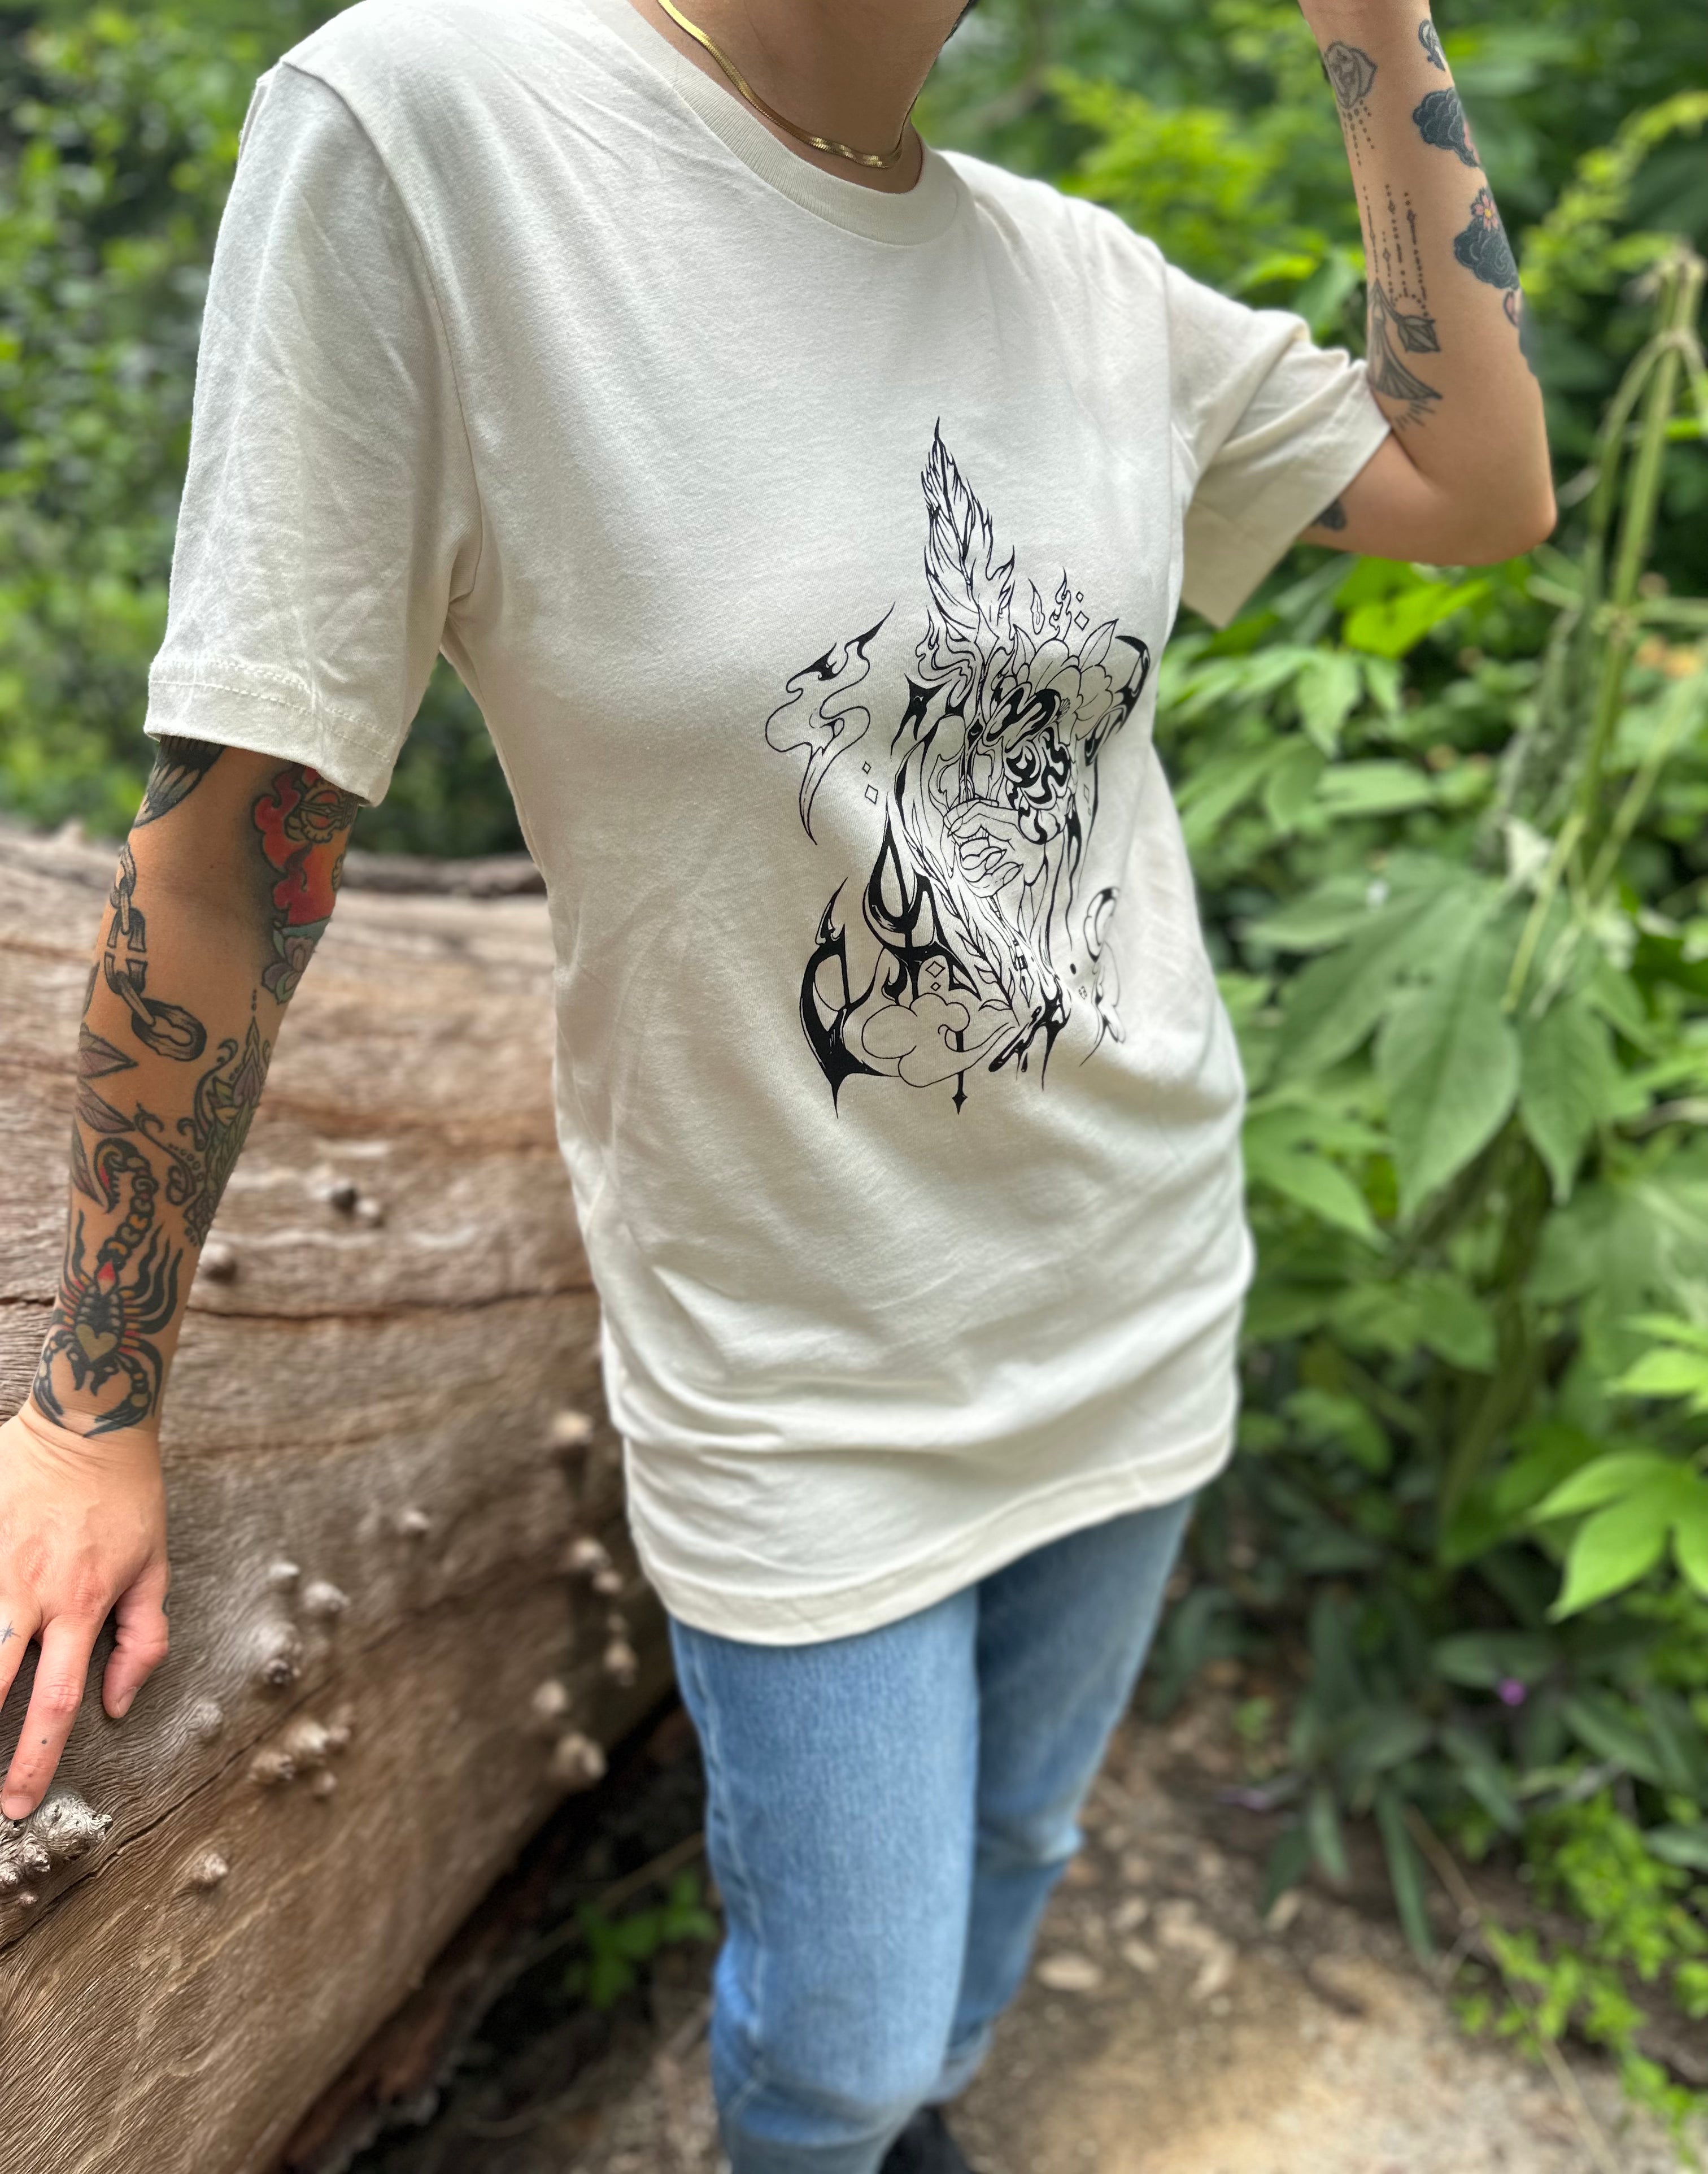 “Inner Work” Limited Edition Shirts (Run of 30)